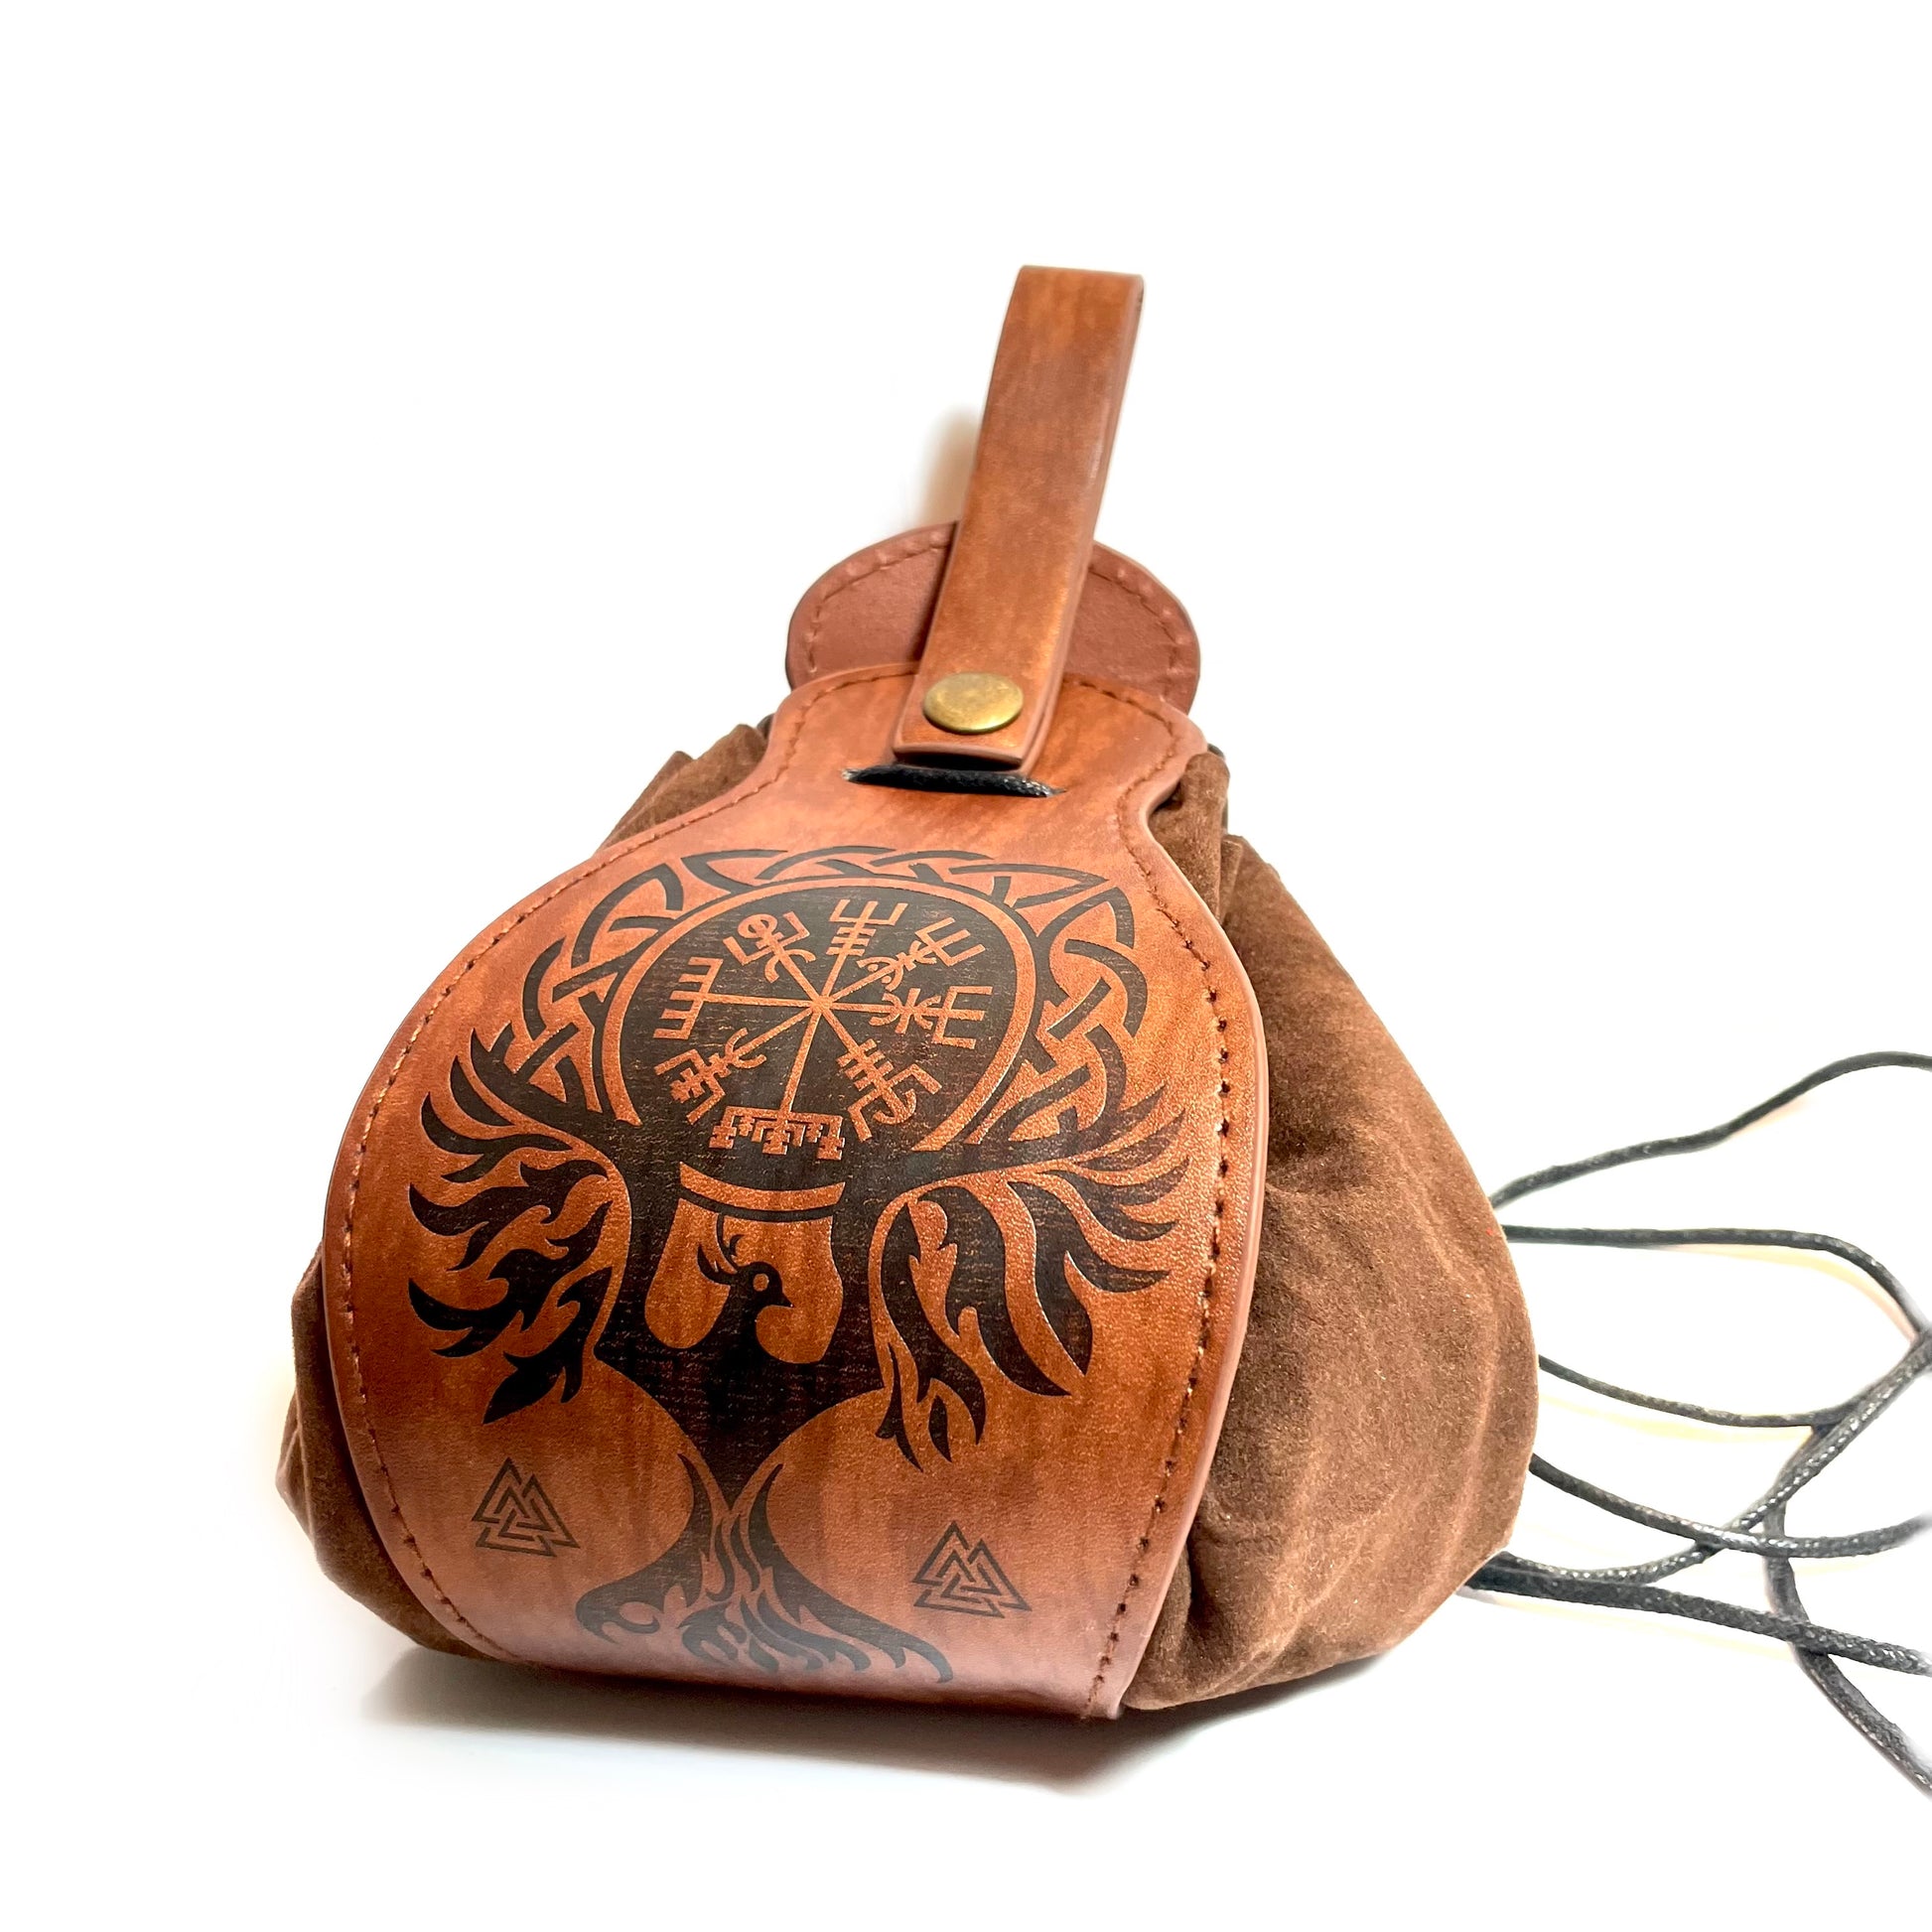 Leather dnd dice bag with phoenix artwork - filled